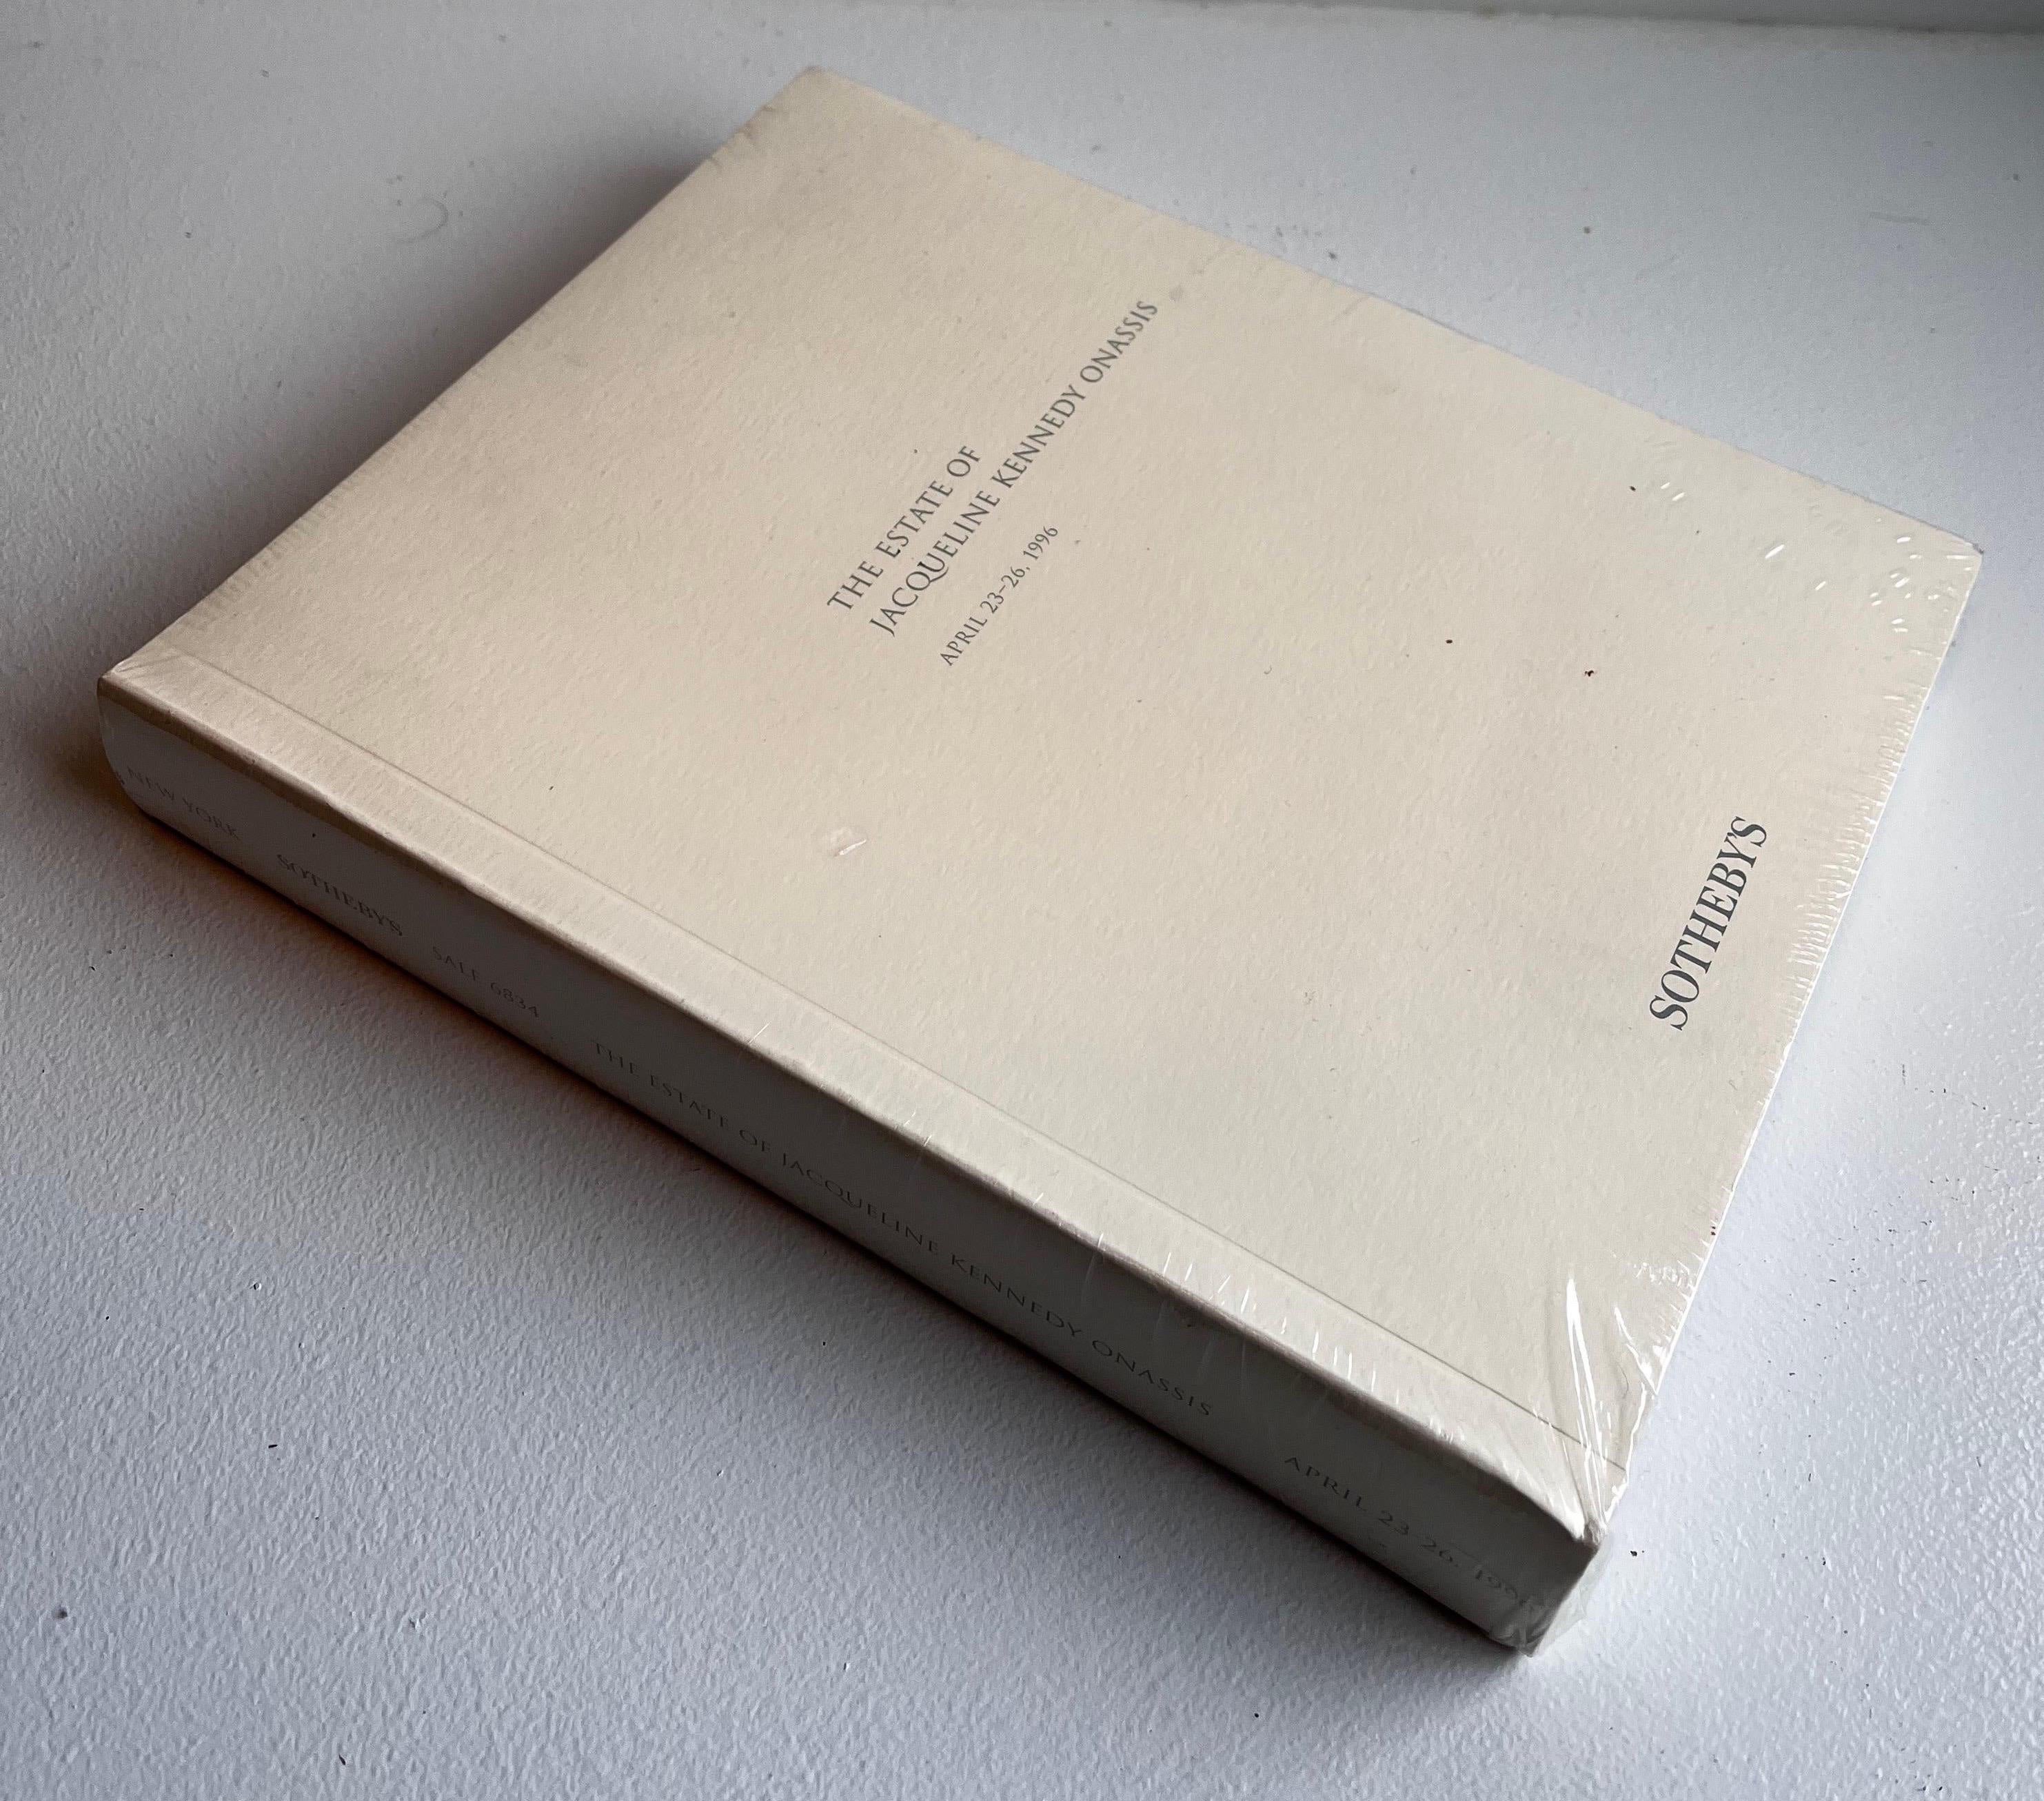 Jacqueline Kennedy Onassis, Sotheby's Auction Catalogue
New in Wrapper - Softcover

